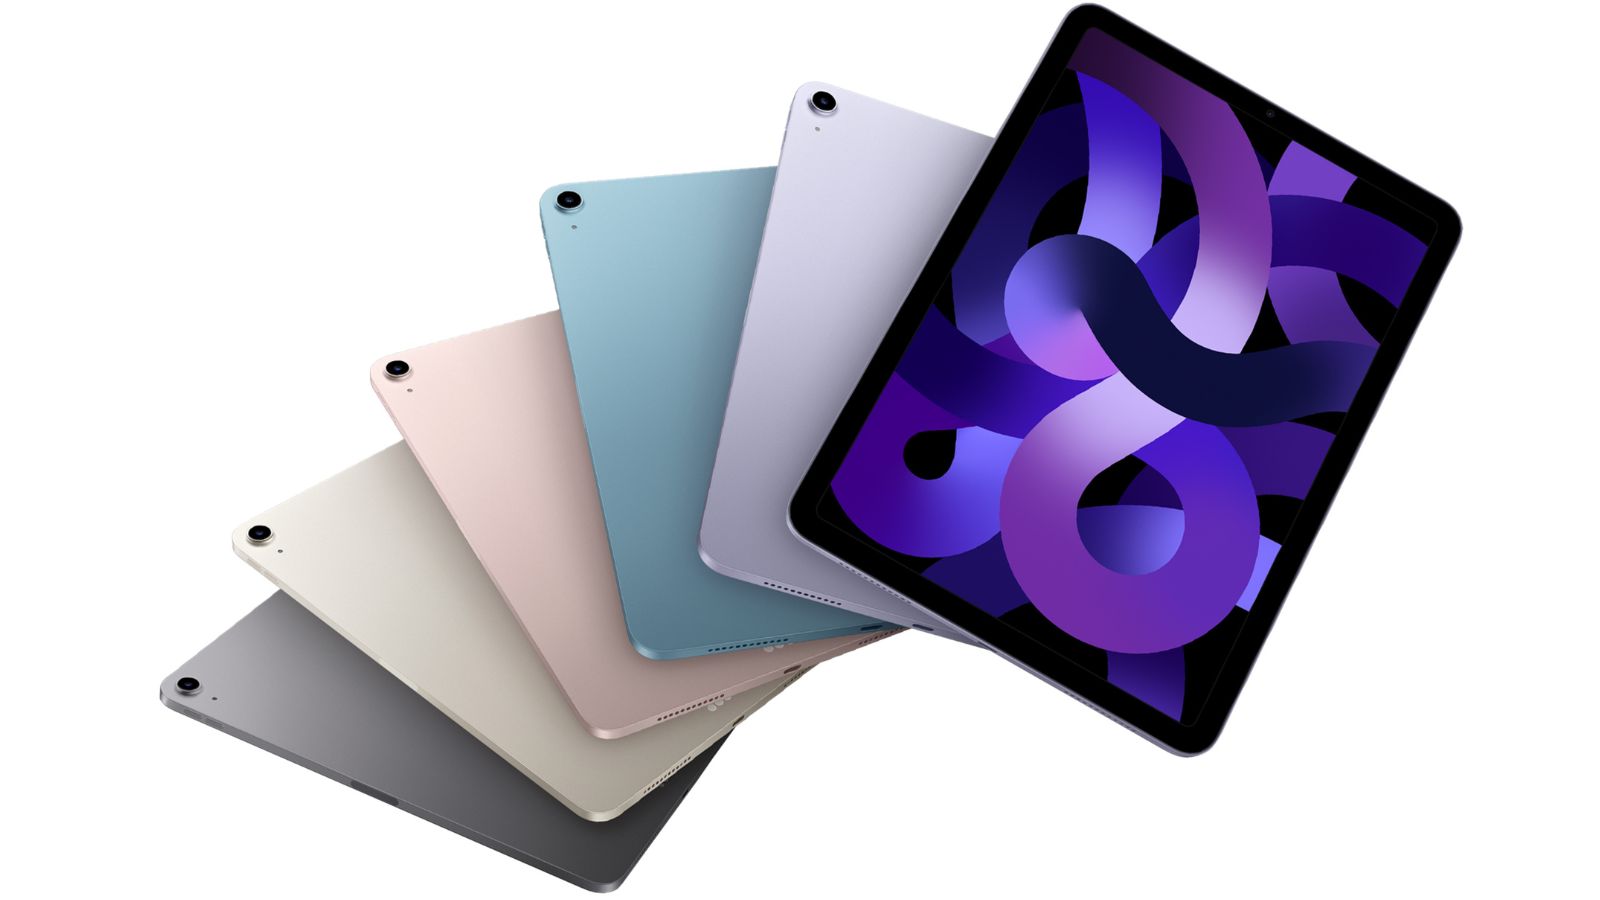 Can't find the best iPad prices? We're here to help!